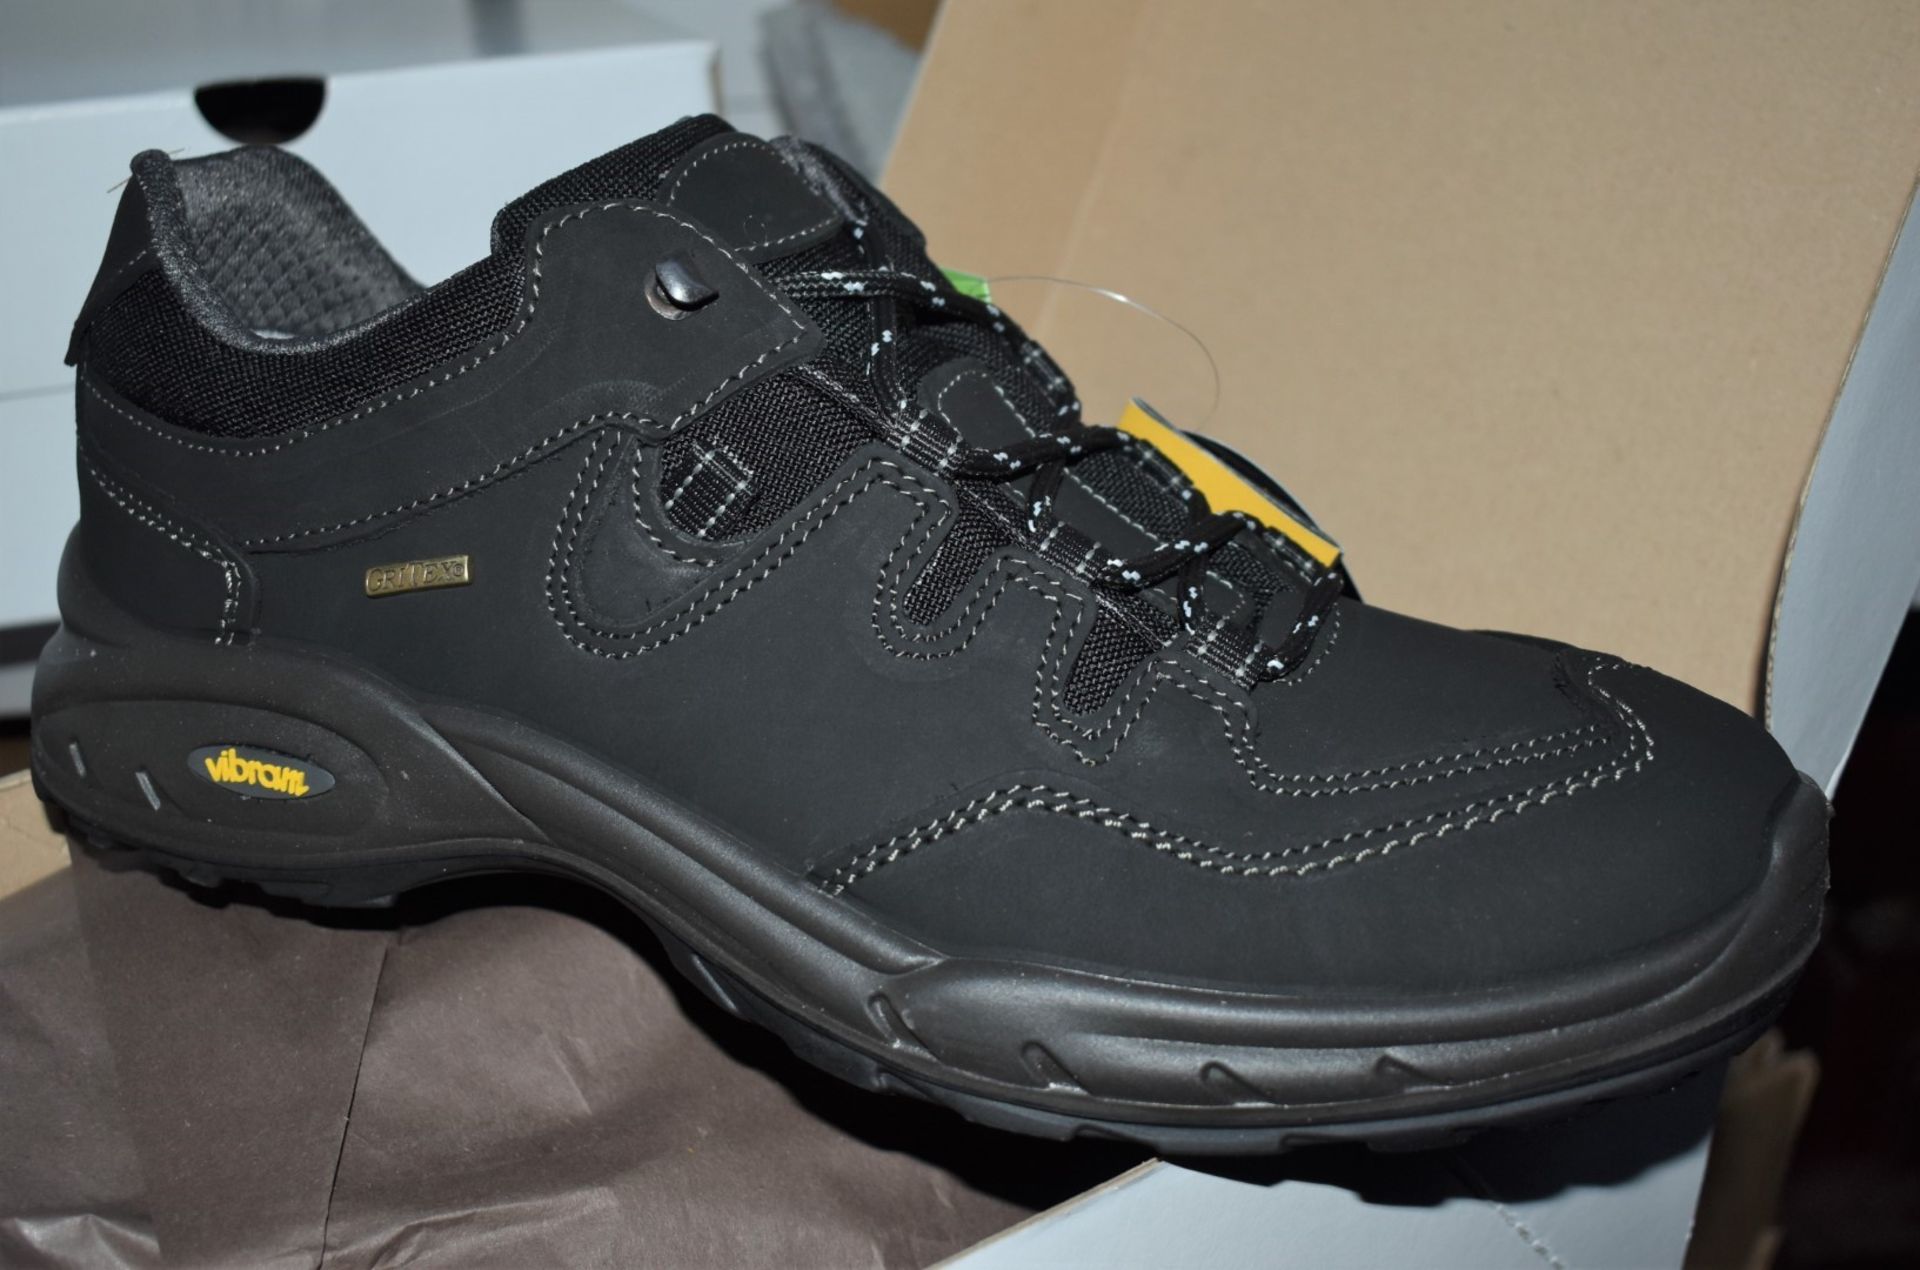 1 x Pair of Mens VIBRAM Walking Shoes - Outdoor GriTex Trekking Shoes With Cordura Fabric - Made - Image 5 of 5